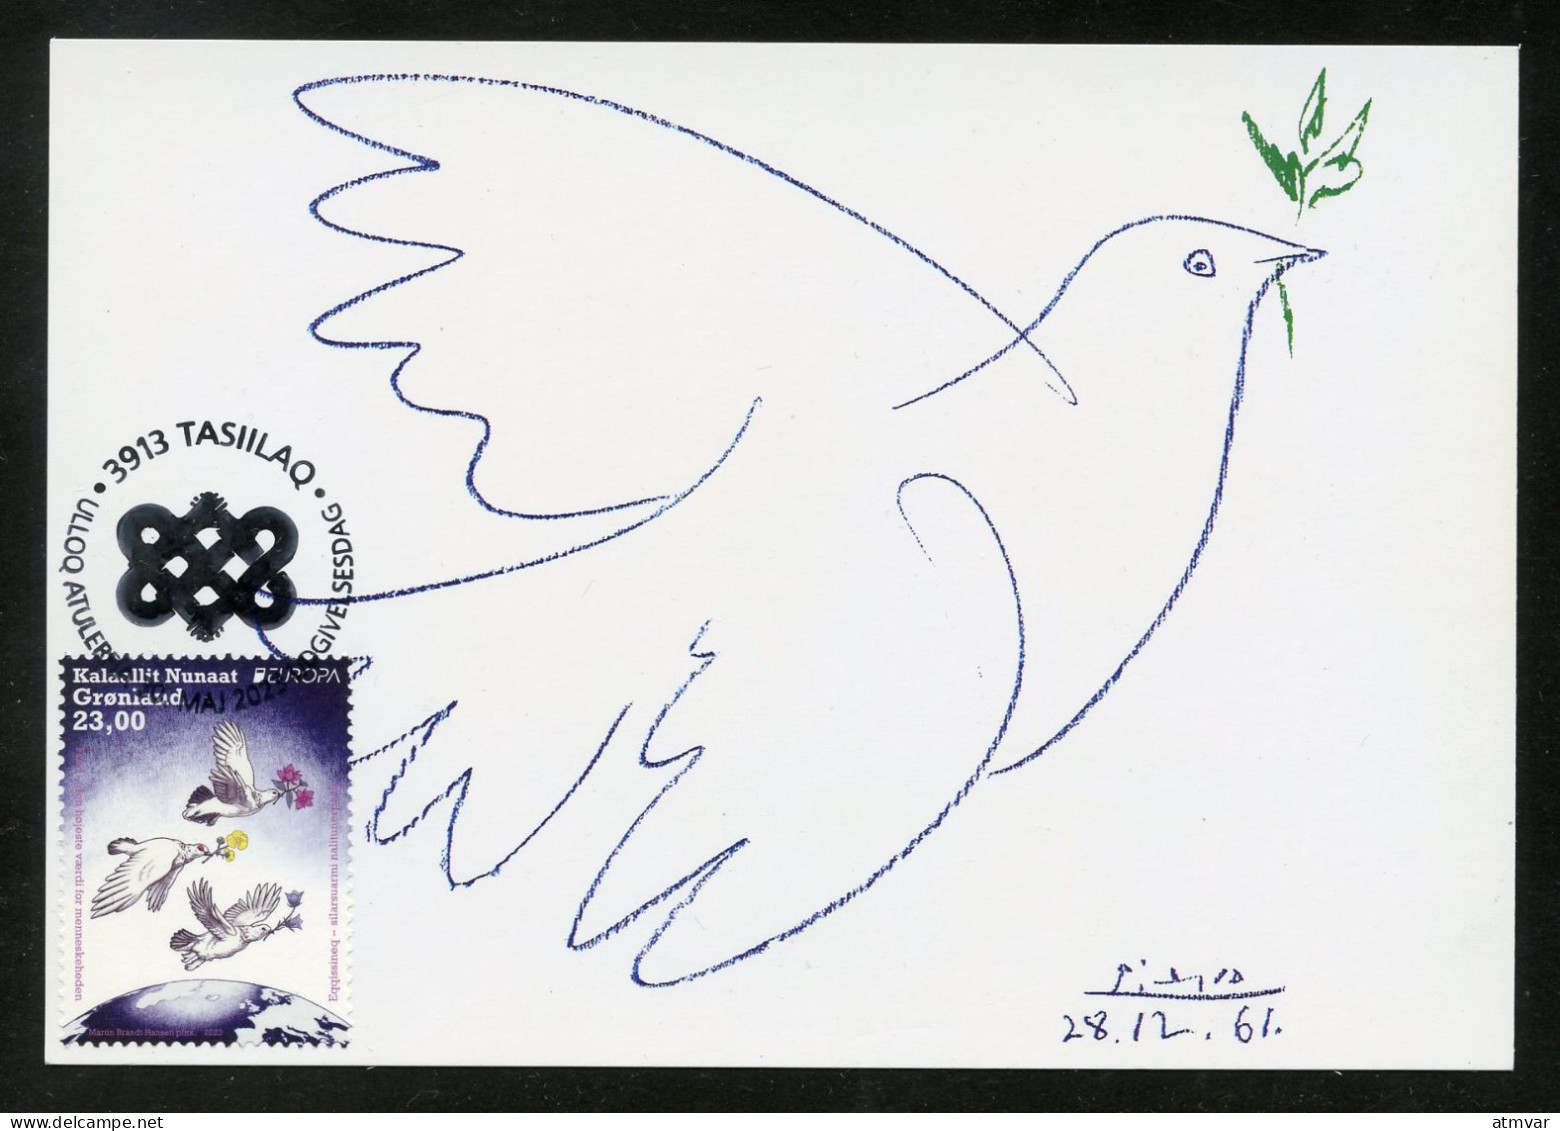 GREENLAND (2023) Carte Maximum Card - EUROPA Peace The Highest Value Of Humanity, Picasso, Dove, Colombe Paix - Cartes-Maximum (CM)